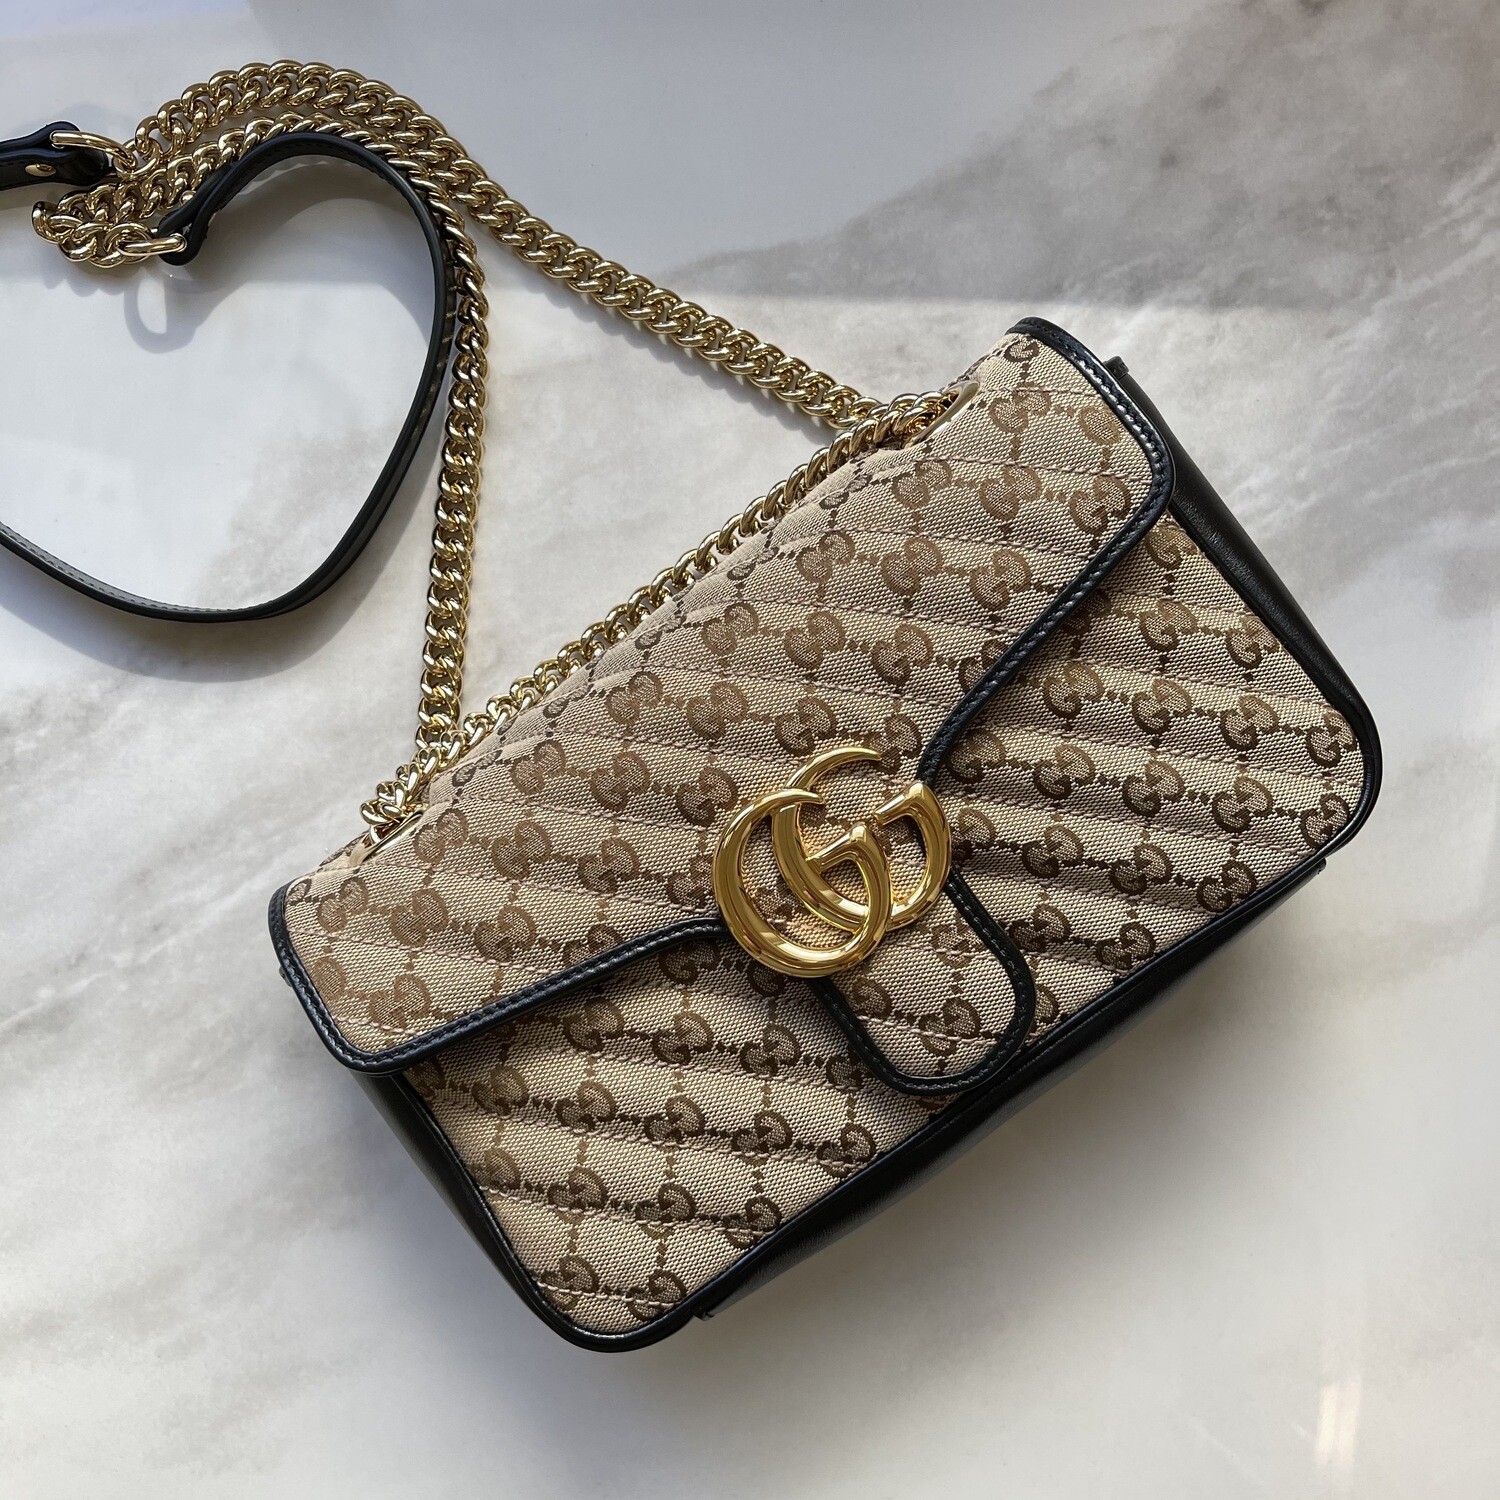 IN STOCK NOW 1:1 Gucci GG Marmont Matelasse Shoulder Bag - Beige Ebony 10 inch